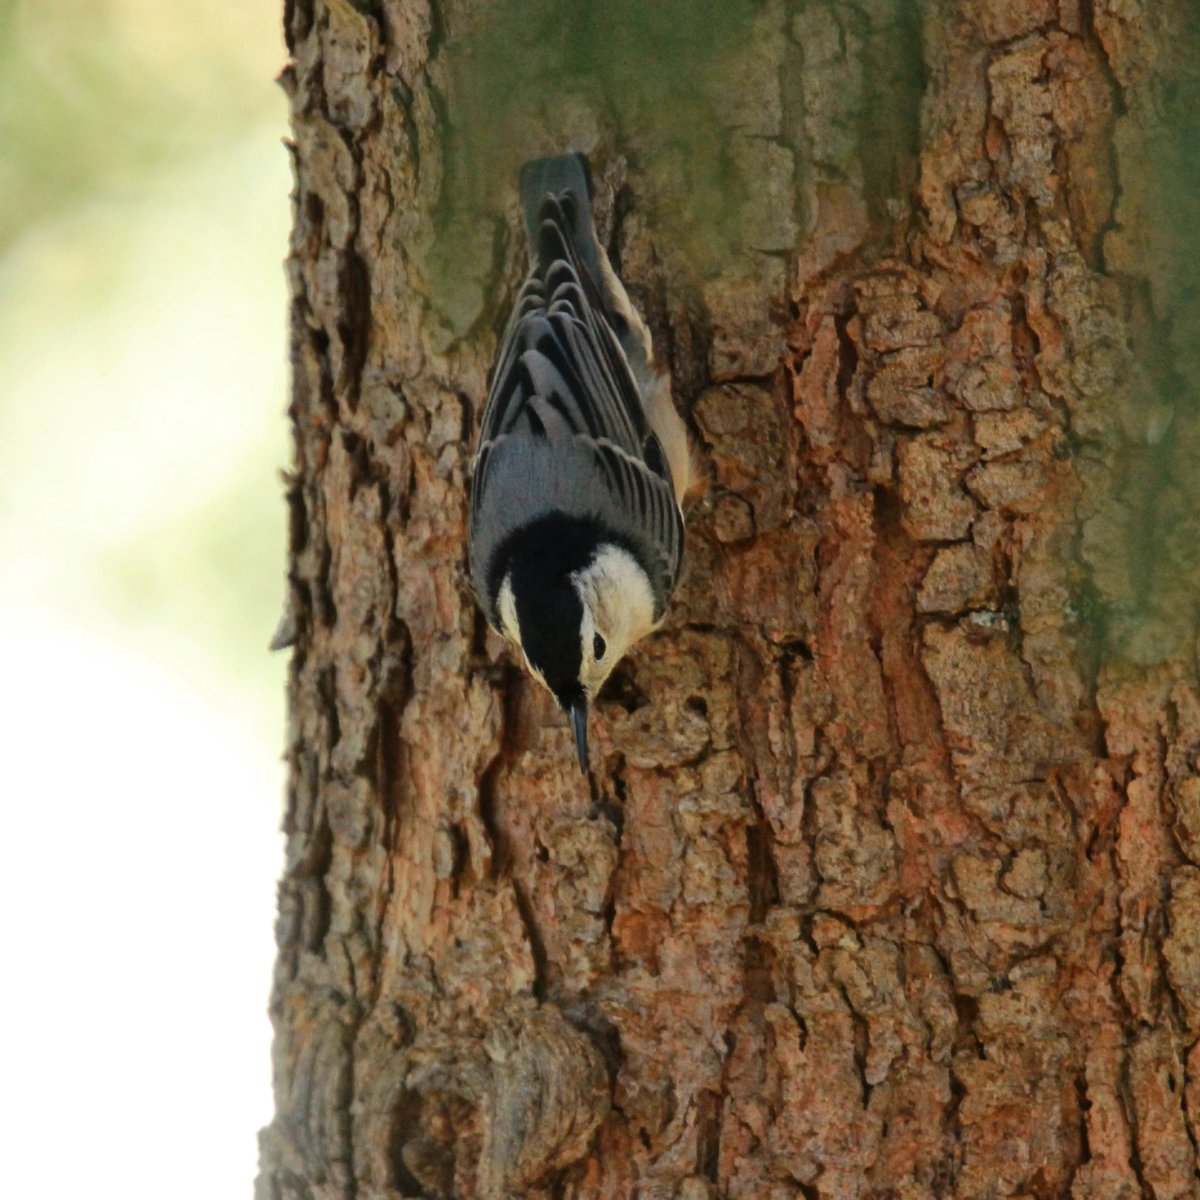 White-breasted nuthatch on a mission! 
#whitebreastednuthatch #whitebreastednuthatches #nuthatch #nuthatches #onamission #mission #birding #ohiobirding #ohiobirder #birder #ohiobirds